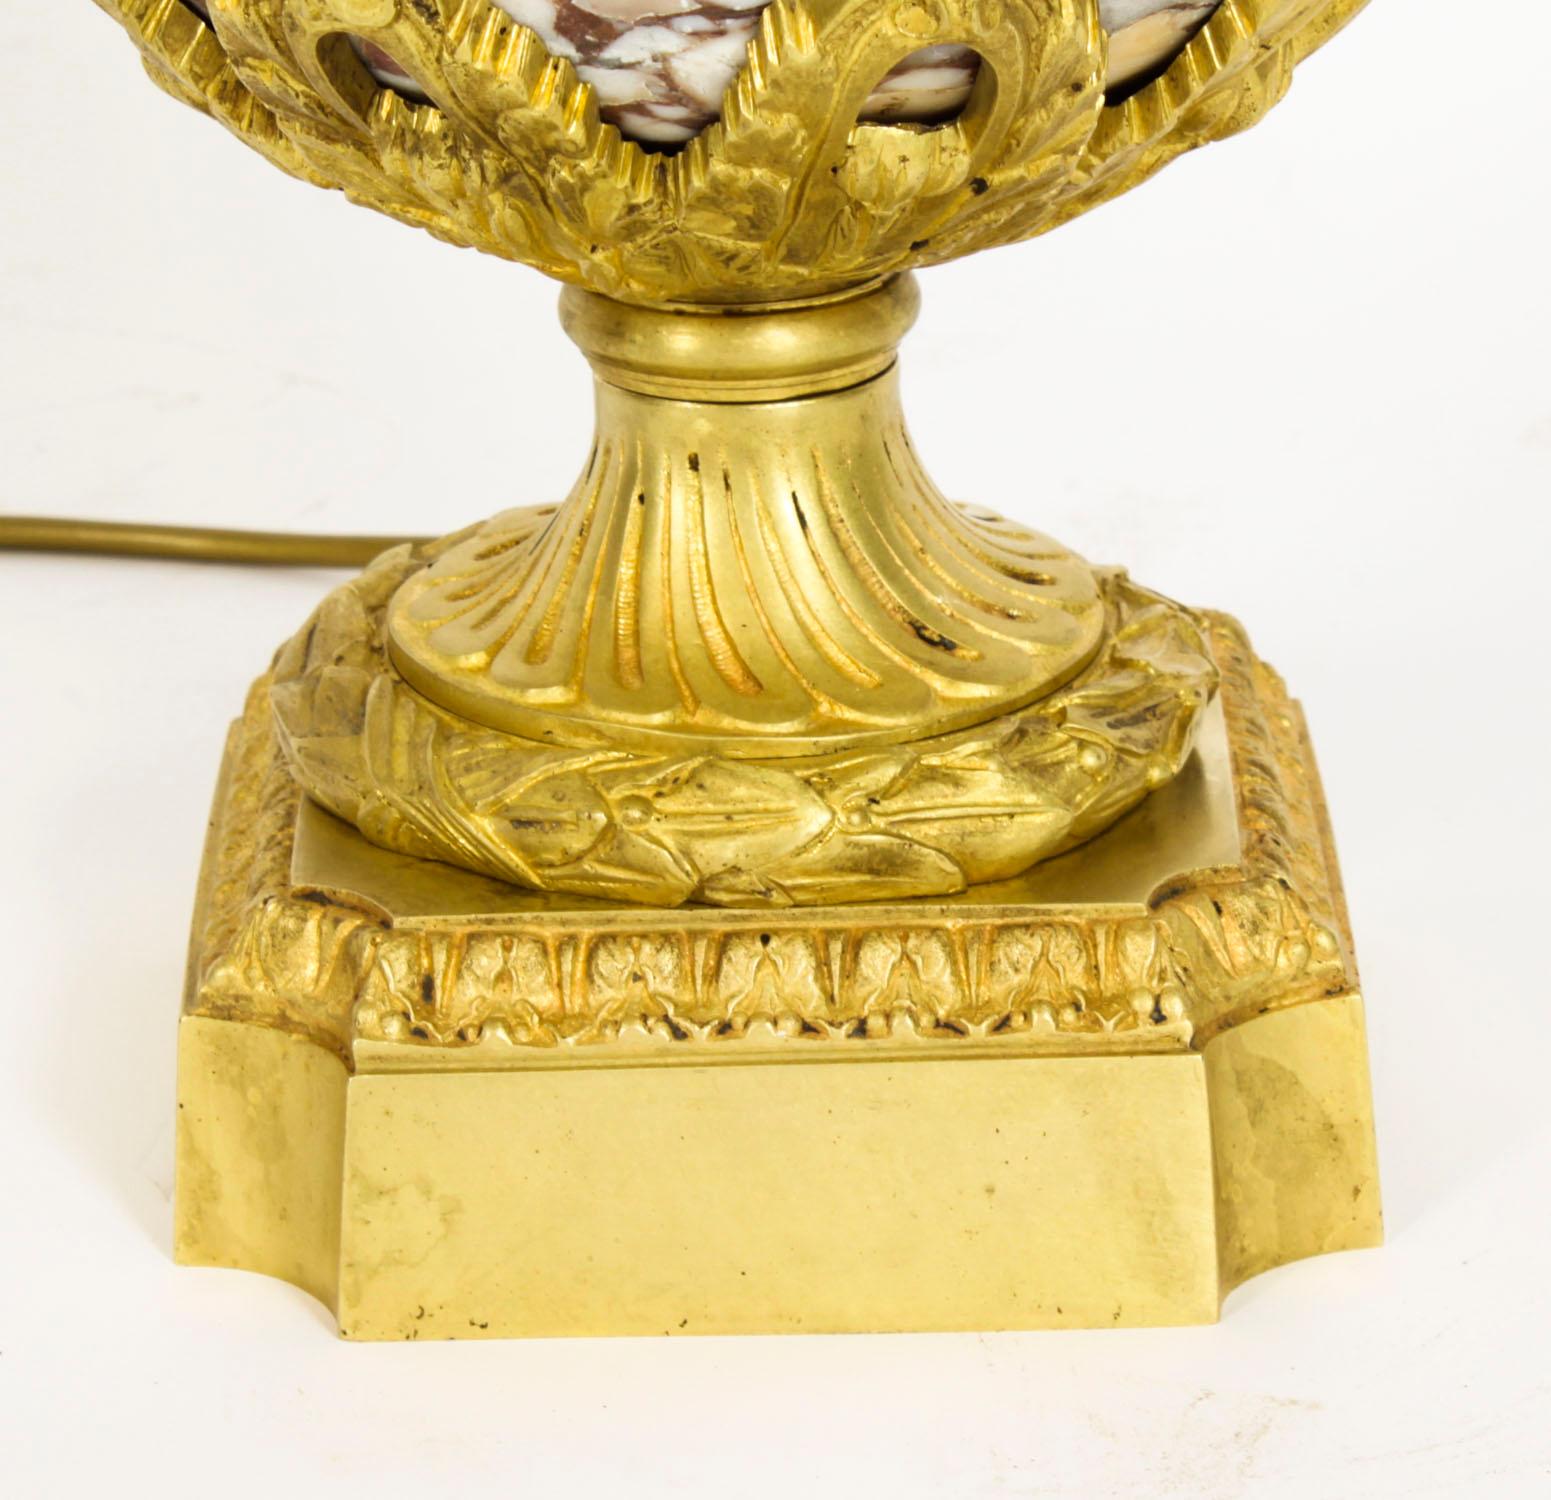 Antique French Louis XVI Revival Ormolu Mounted Marble Table Lamp 1860s For Sale 8